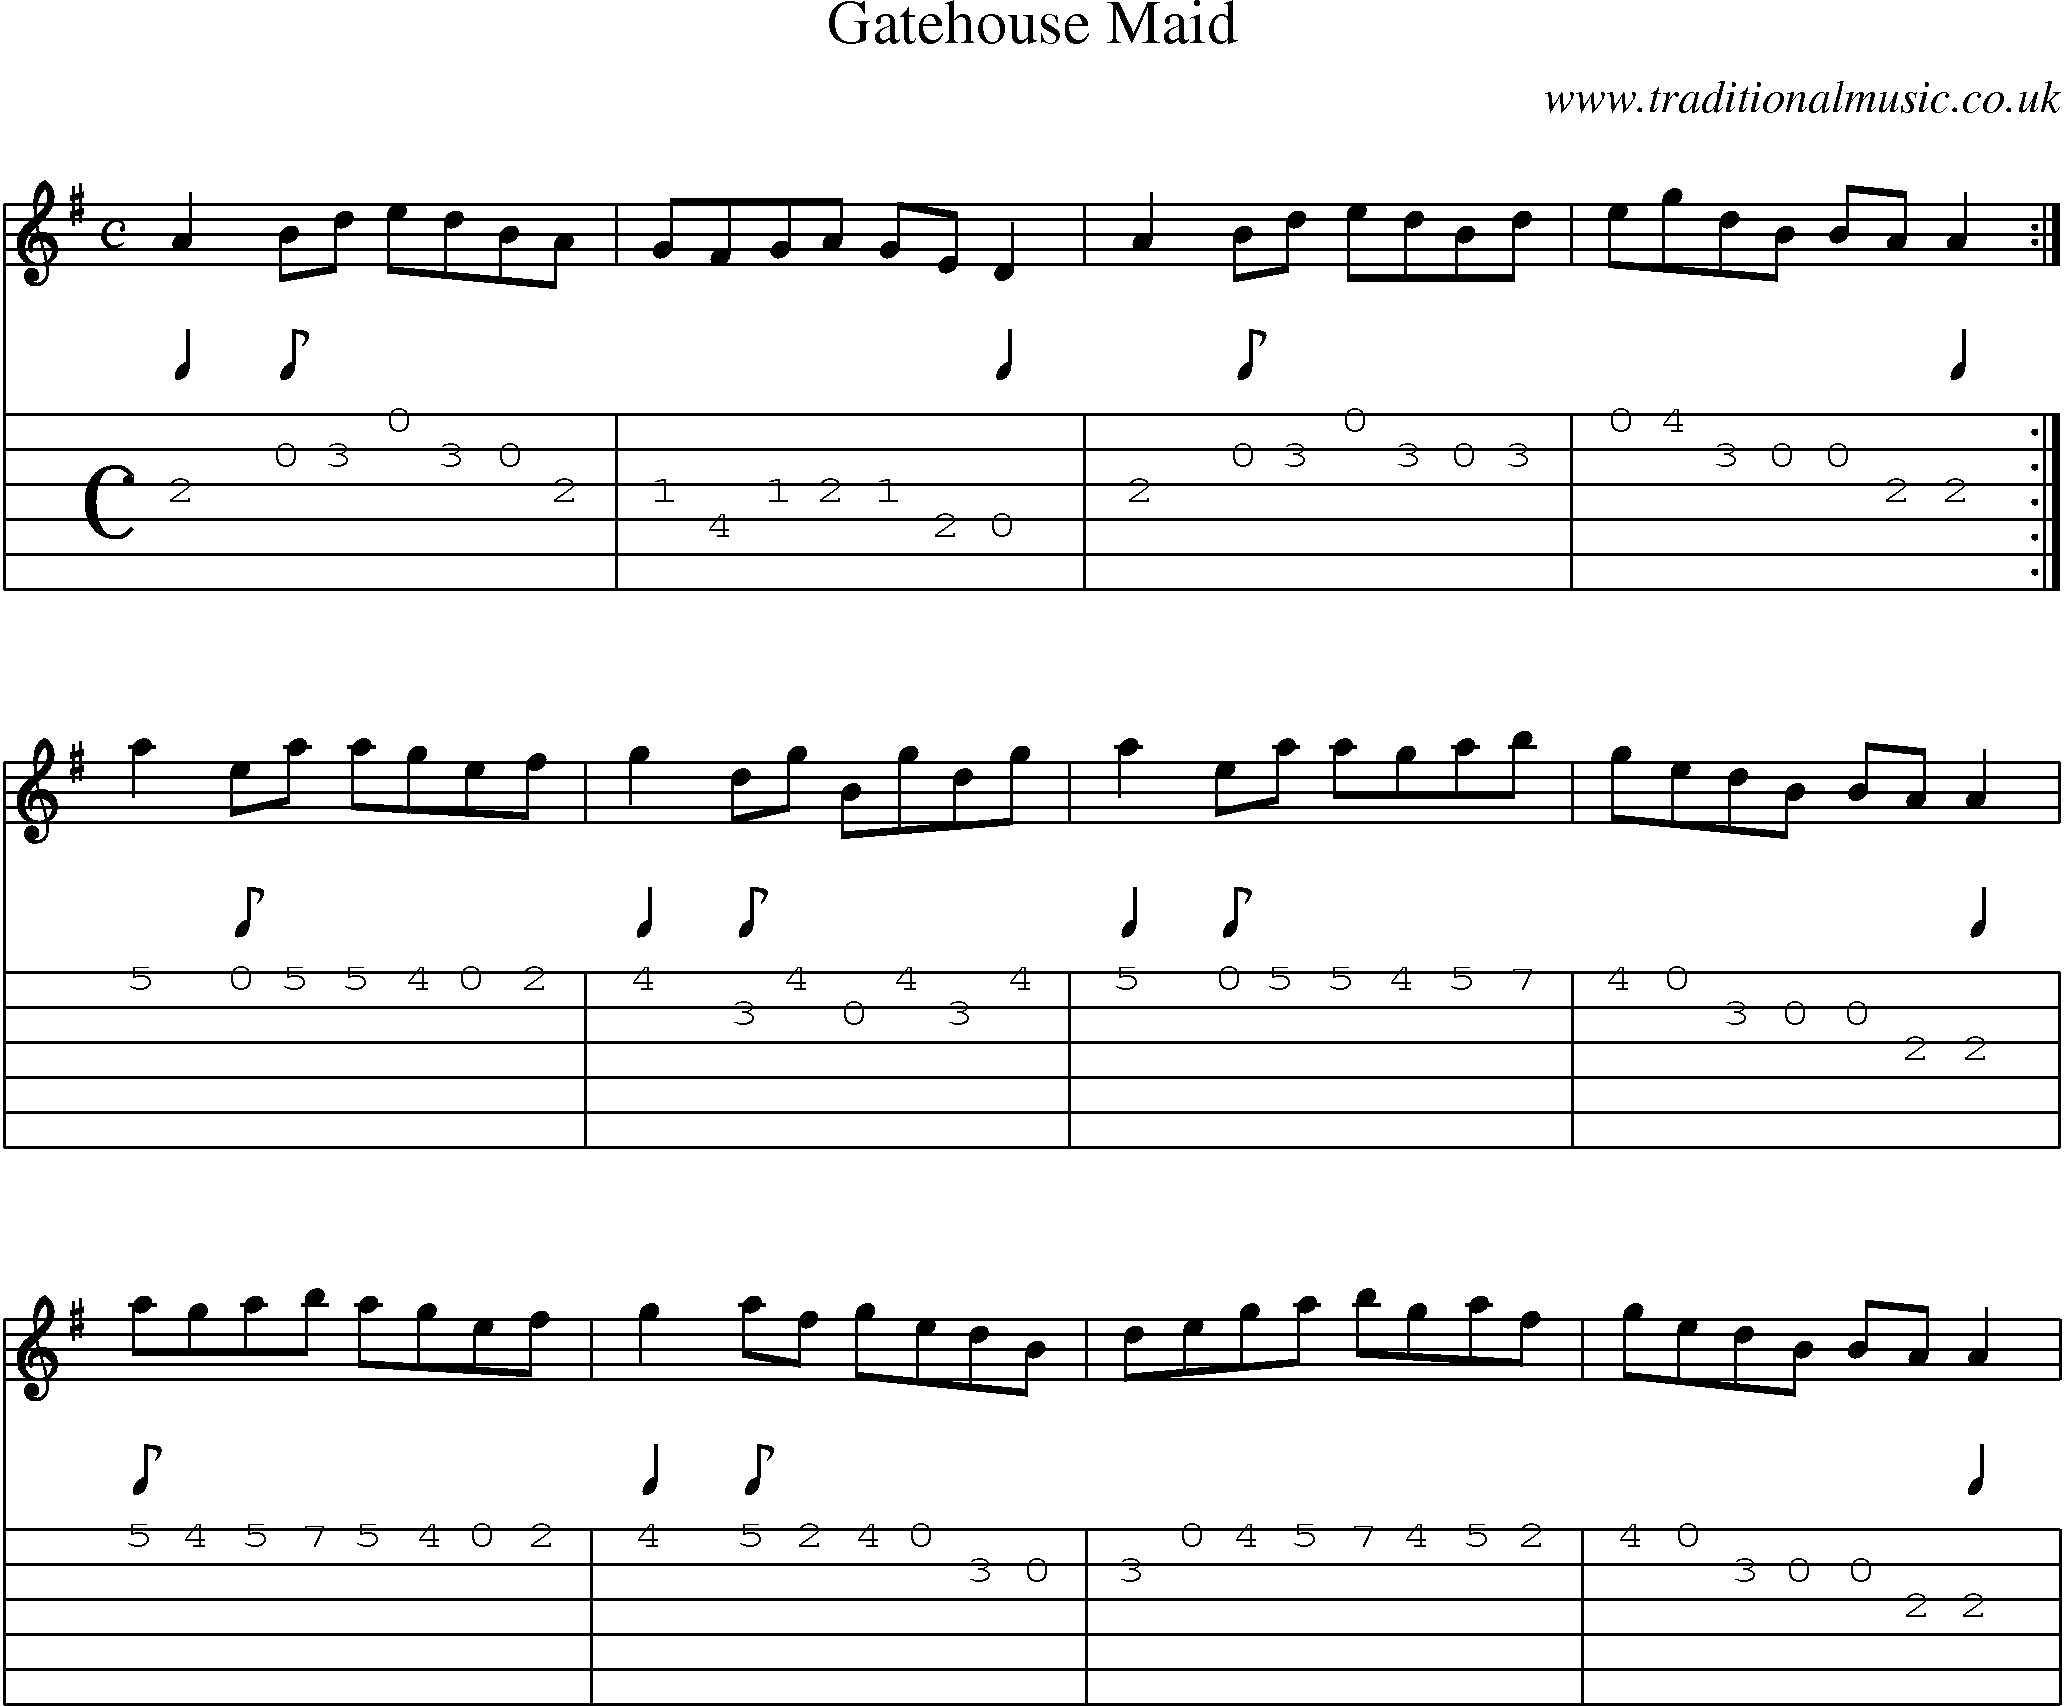 Music Score and Guitar Tabs for Gatehouse Maid